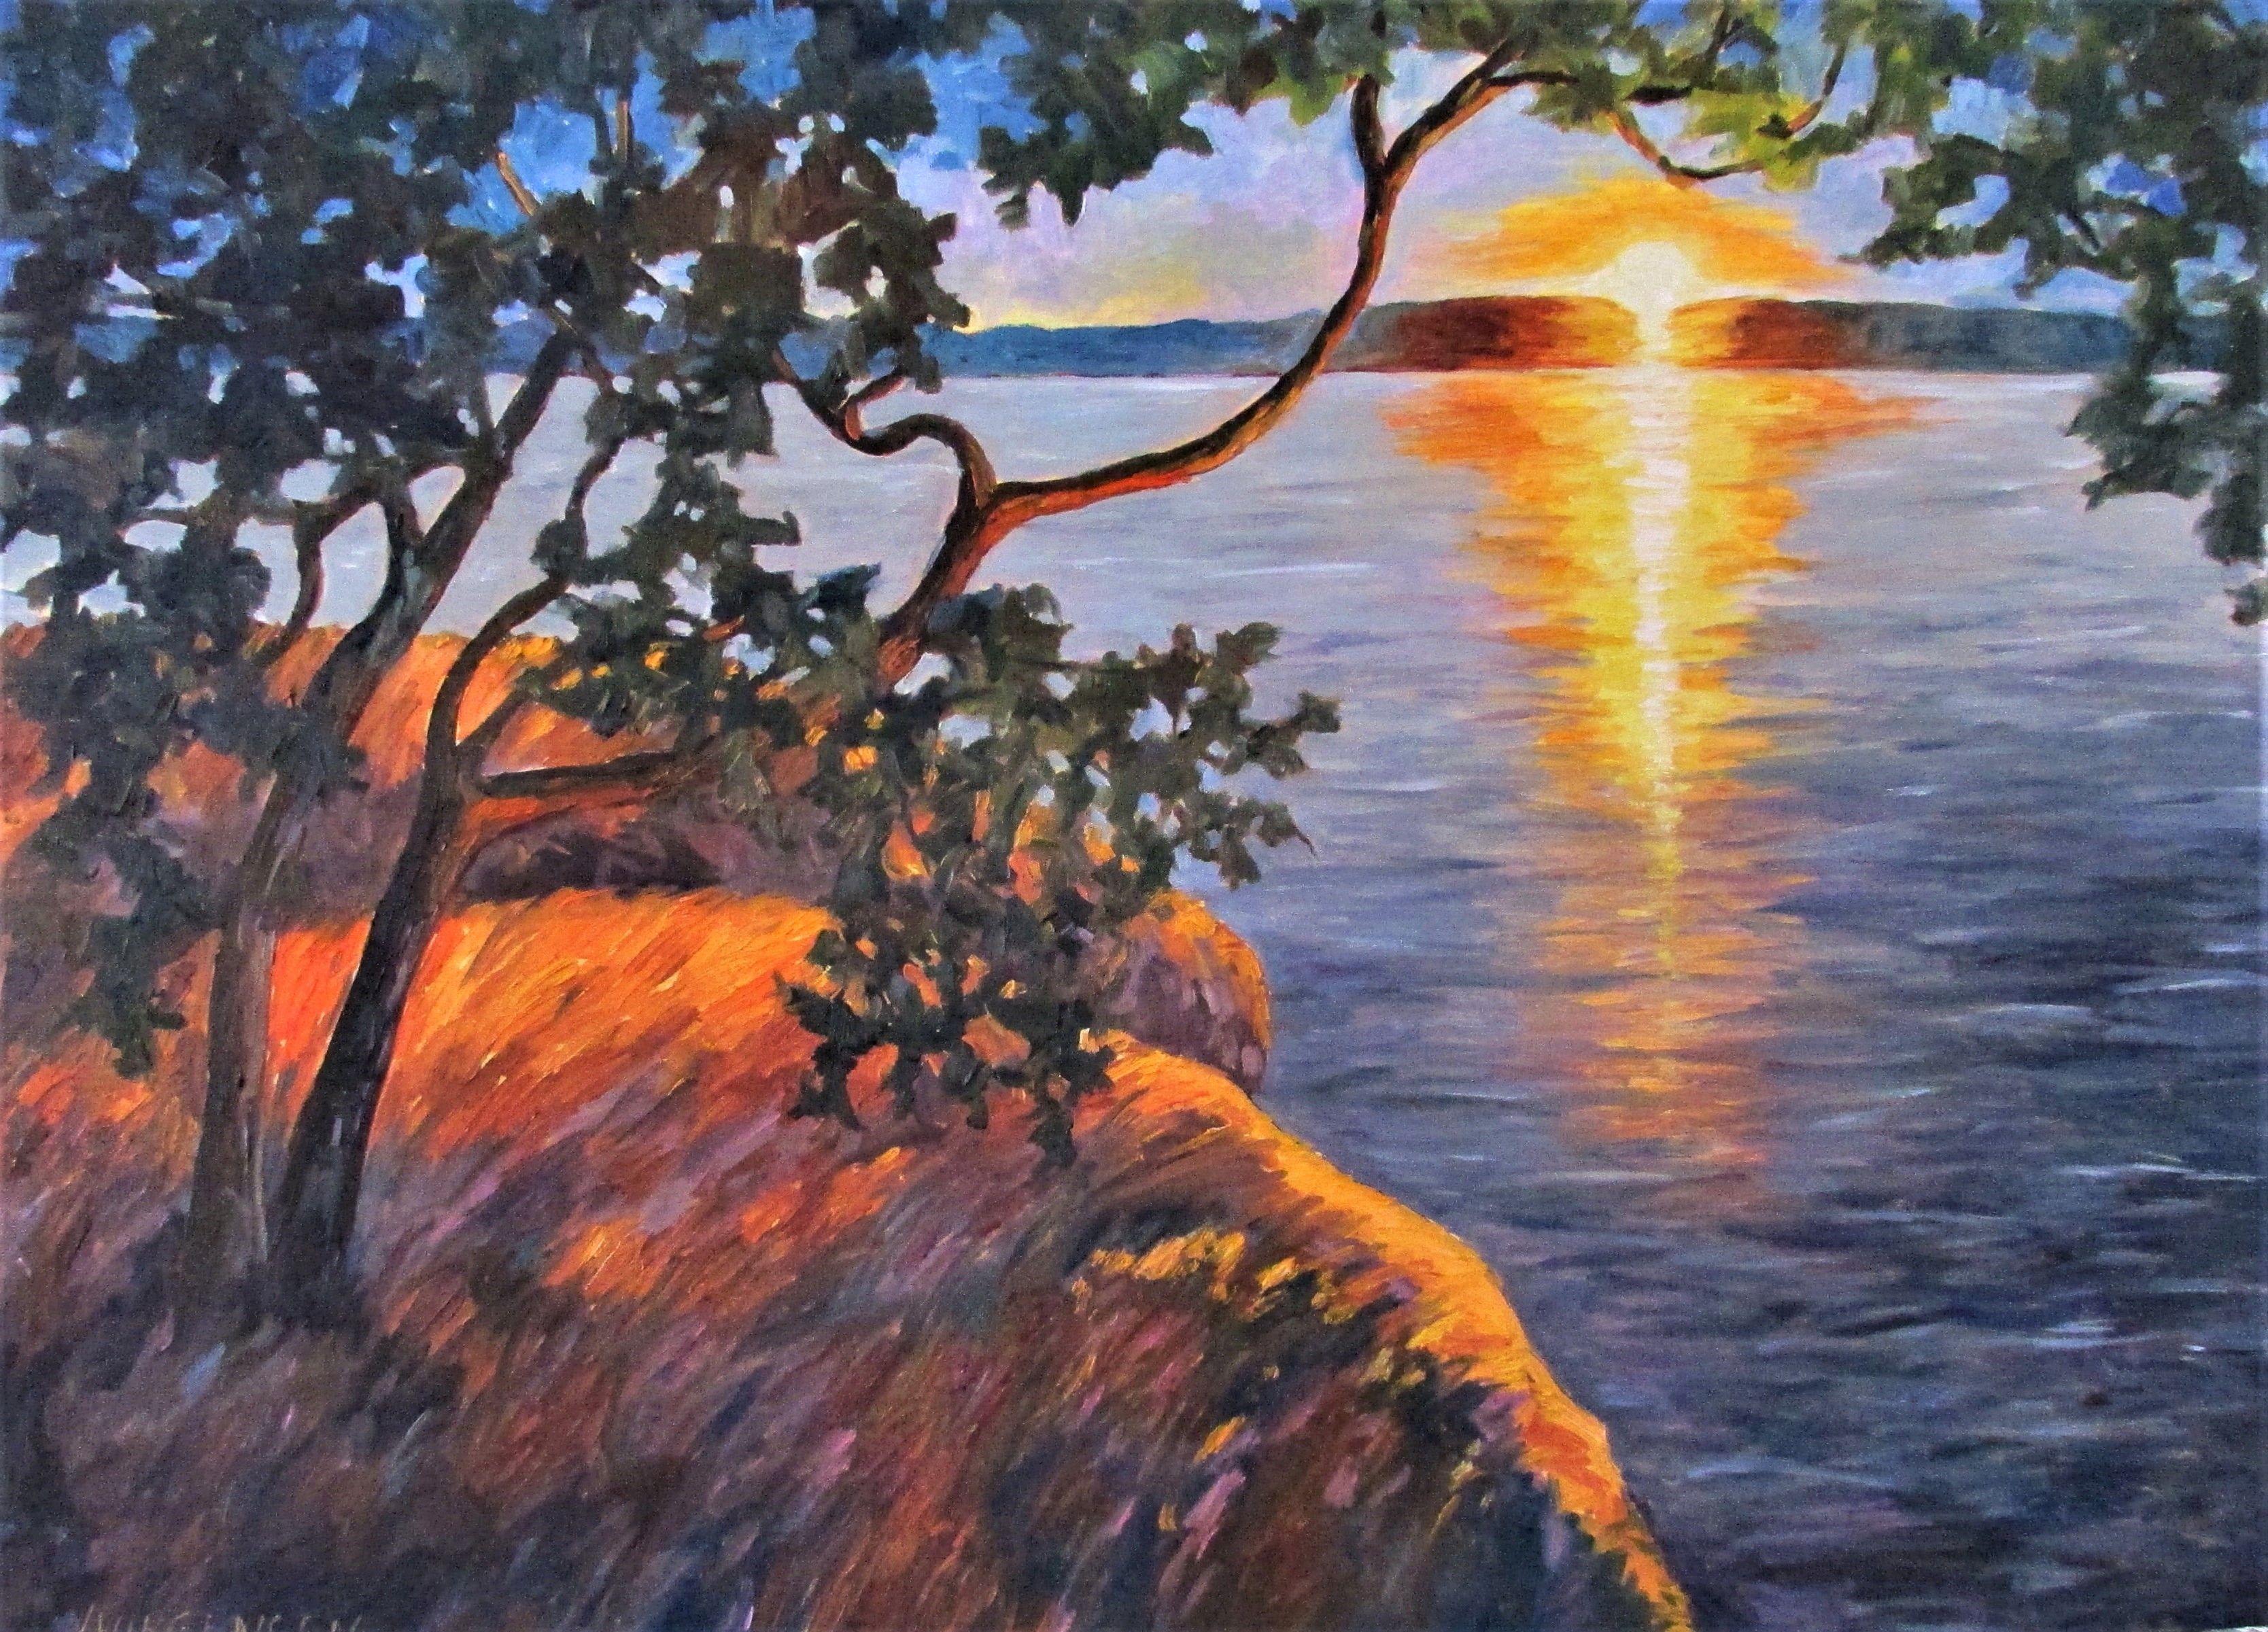 The Gulf Islands are situated off the coast of Vancouver Island and are famous for the spectacular sunsets that can be witnessed there.  The arbutus trees are tinged with orange as the sun is setting behind the hills. This painting is vibrant with